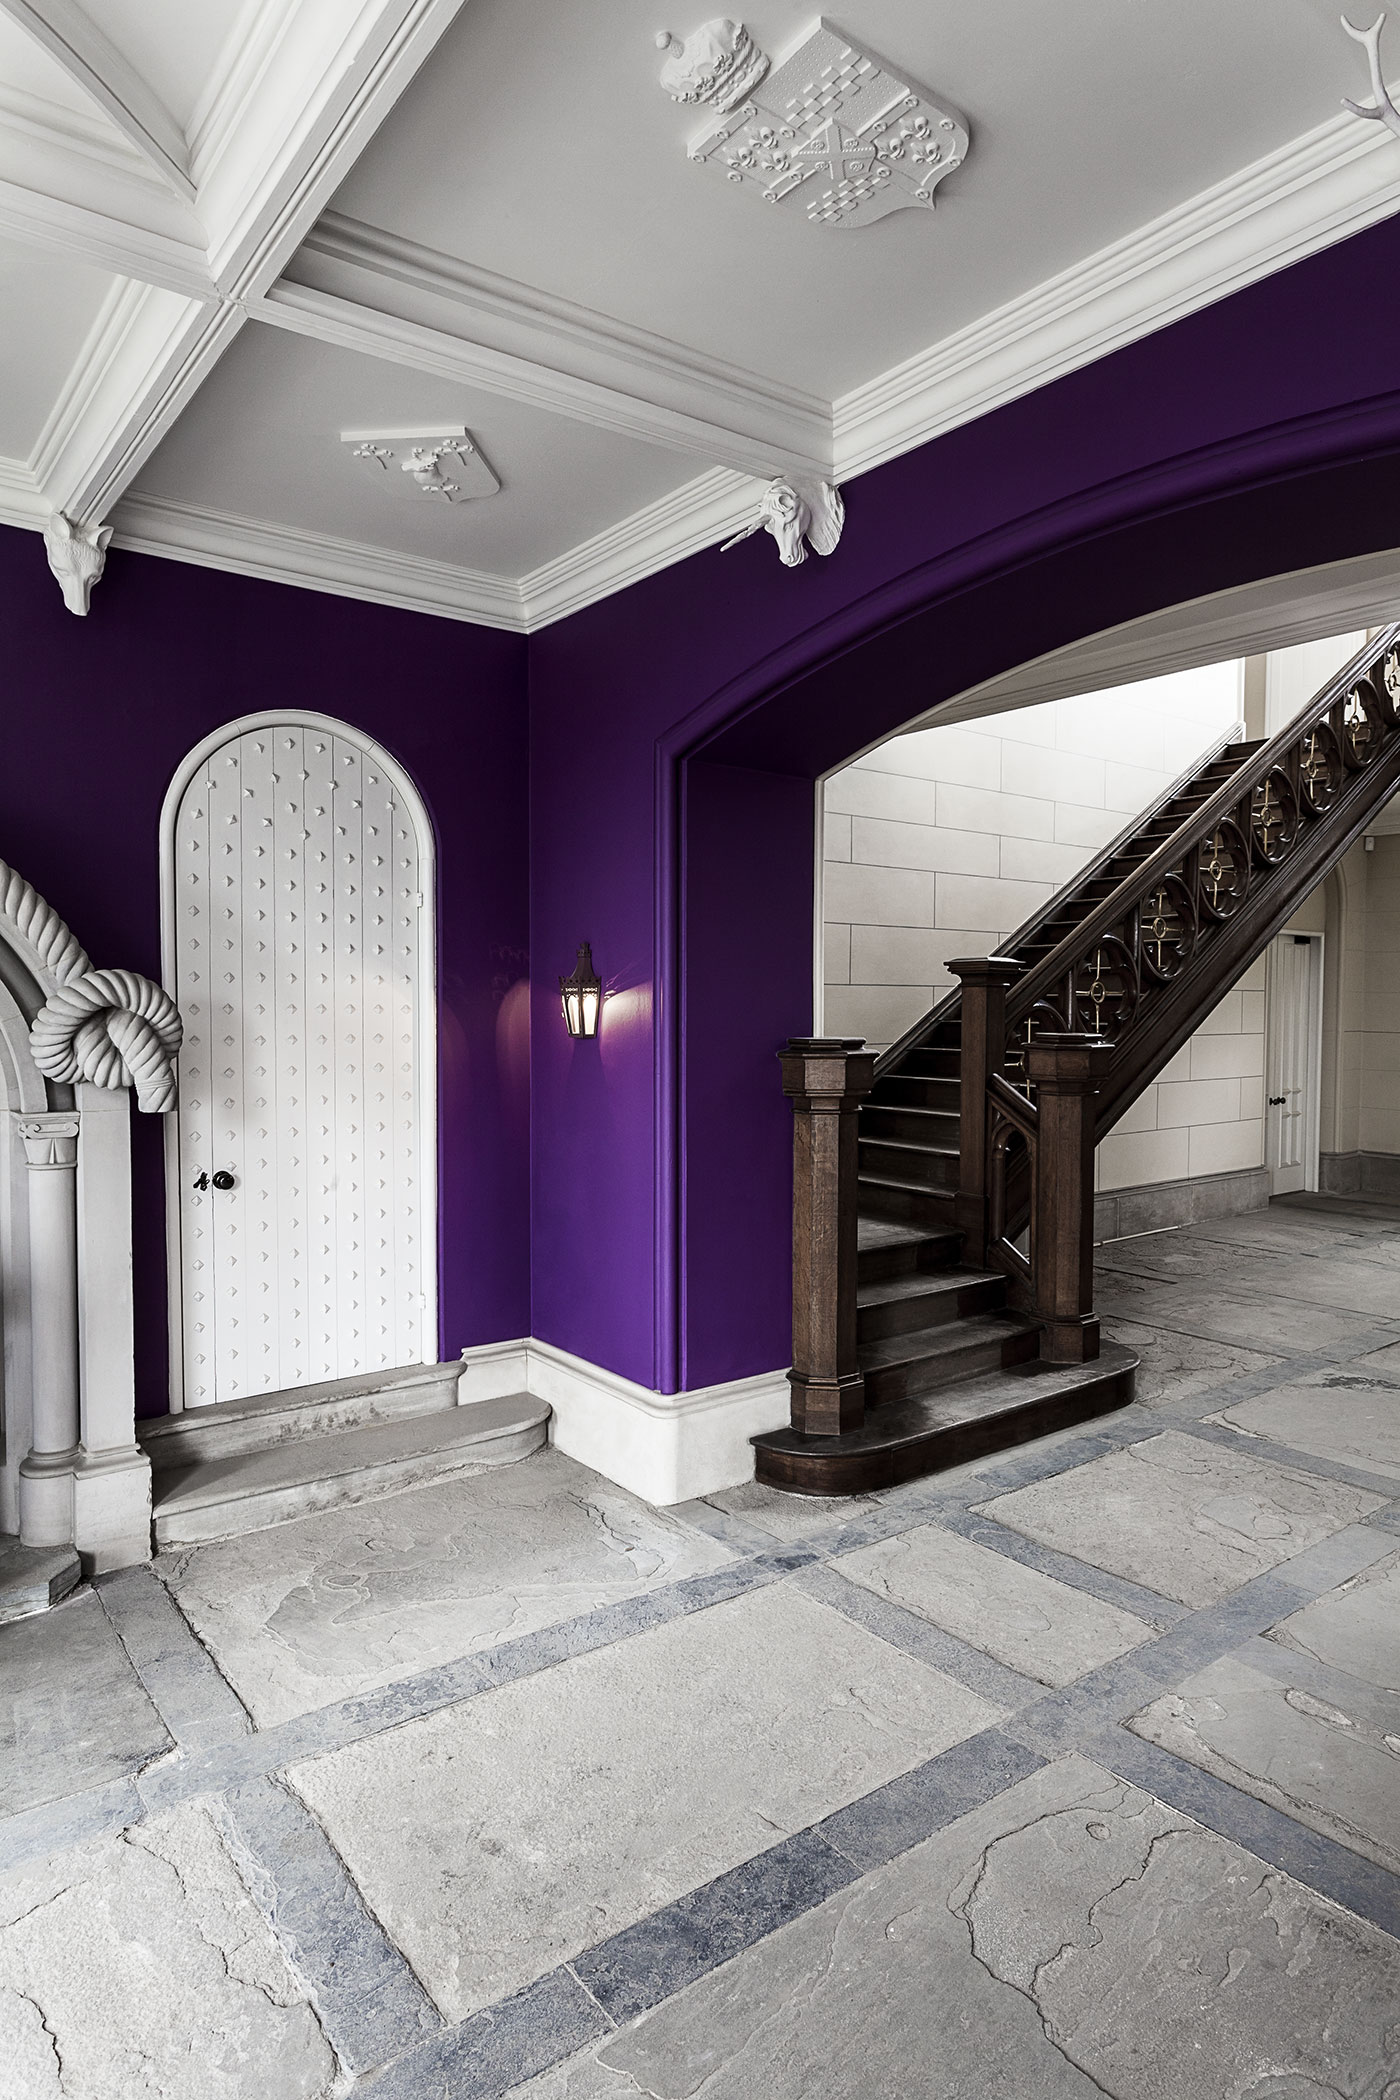 Interior Staircase at Dunimarle Castle, GLM Architects Edinburgh